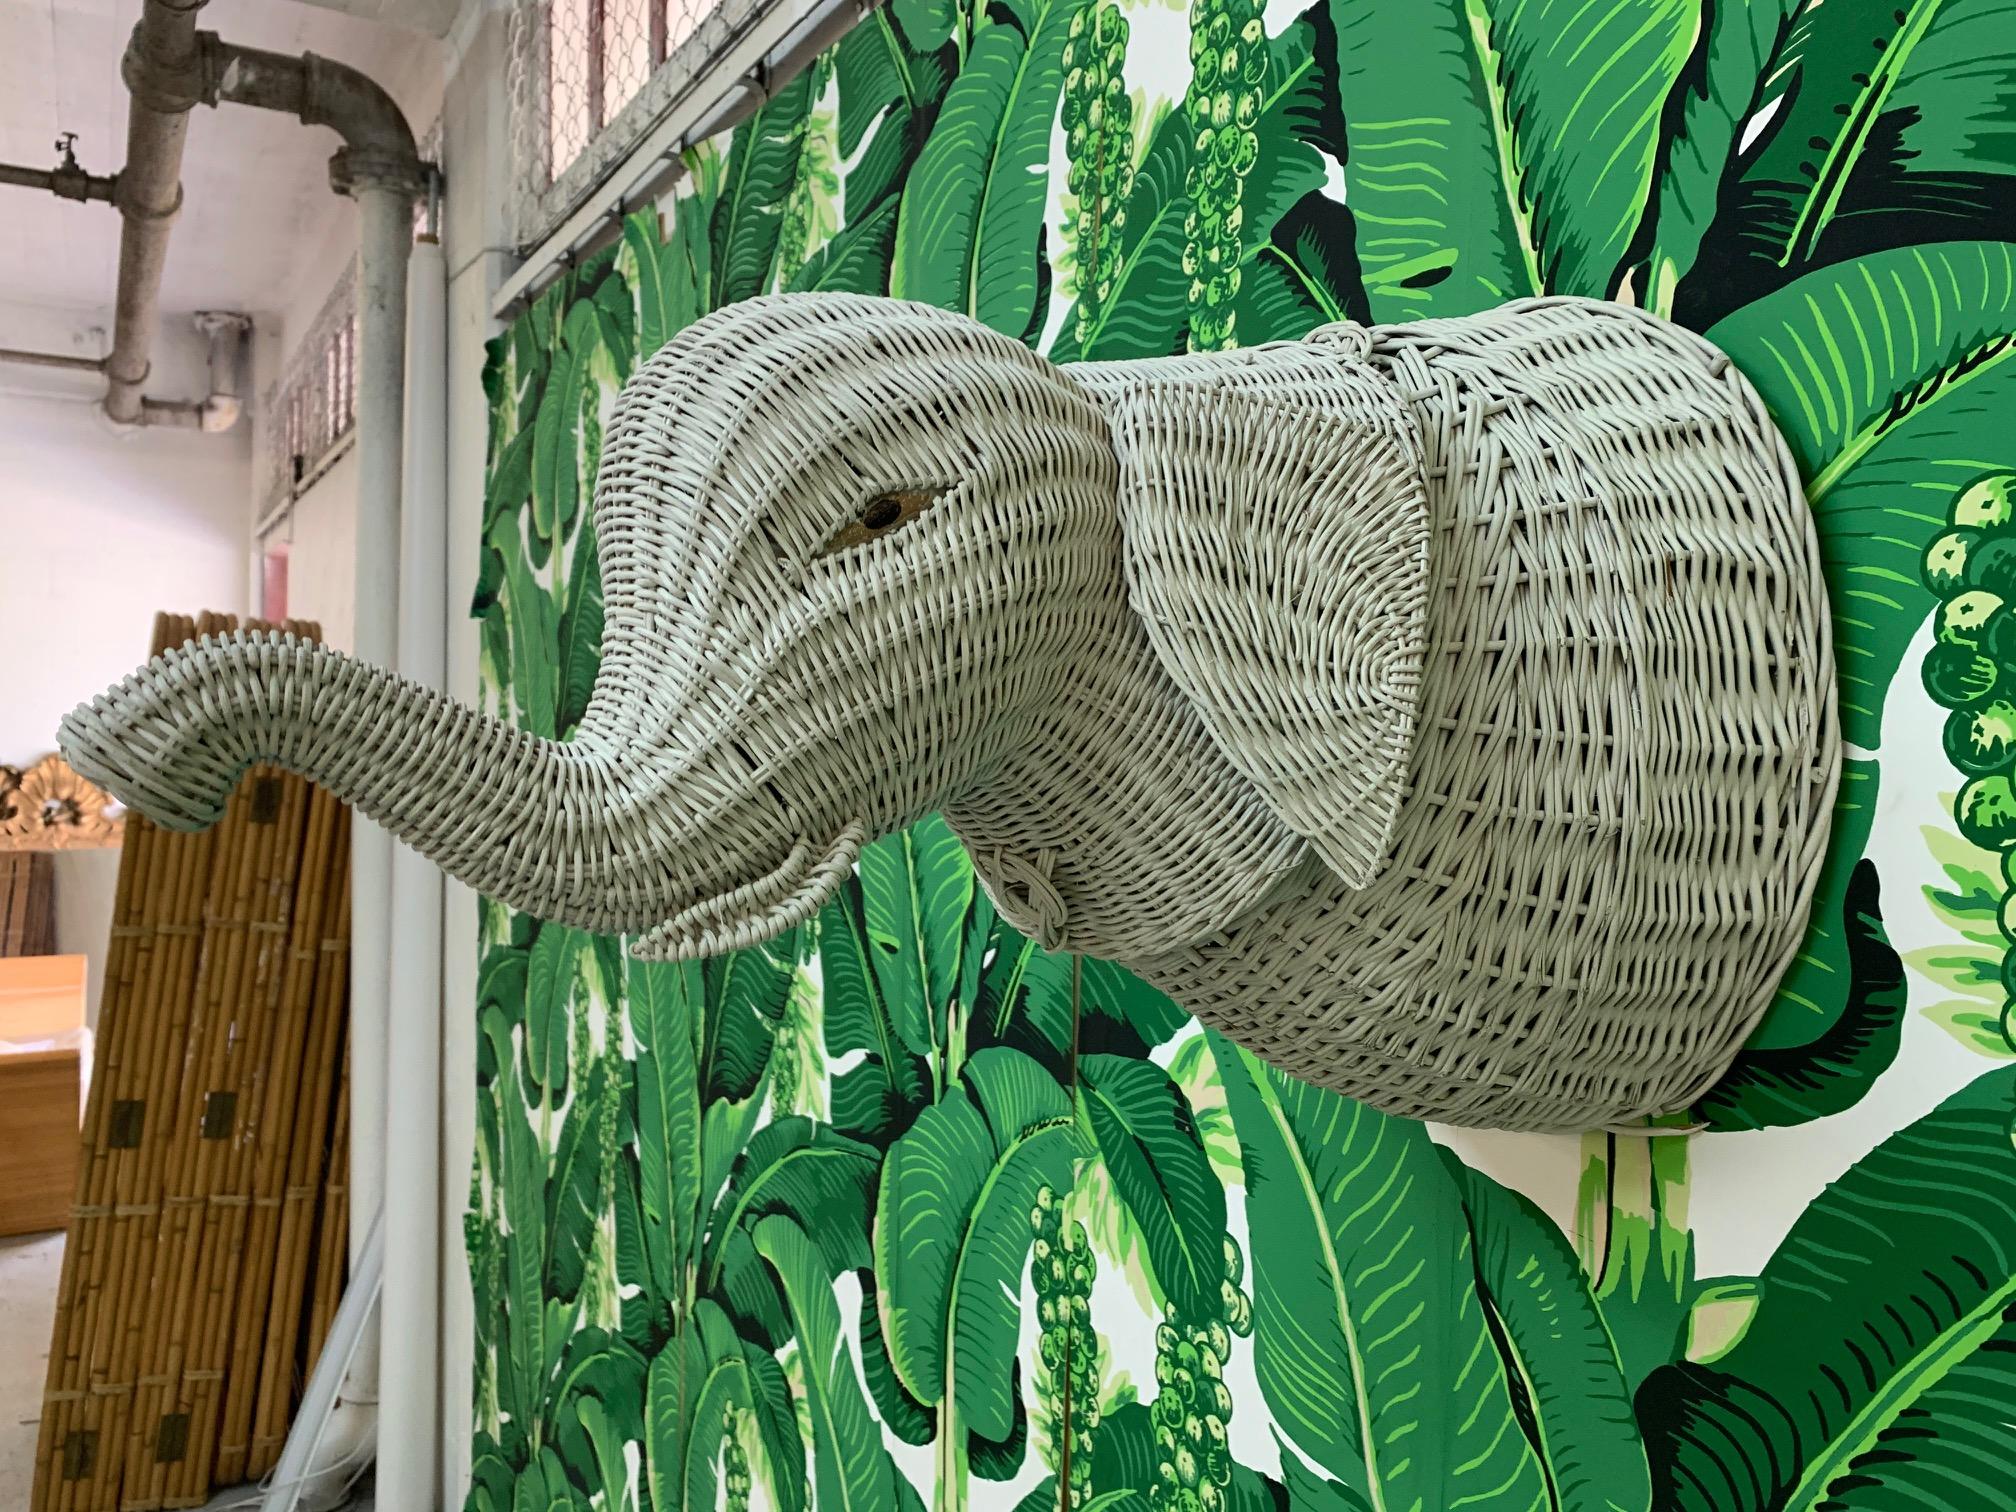 Vintage wicker elephant head to grace any wall and add a bit of whimsy to any decor. Good condition with only very minor imperfections consistent with age.